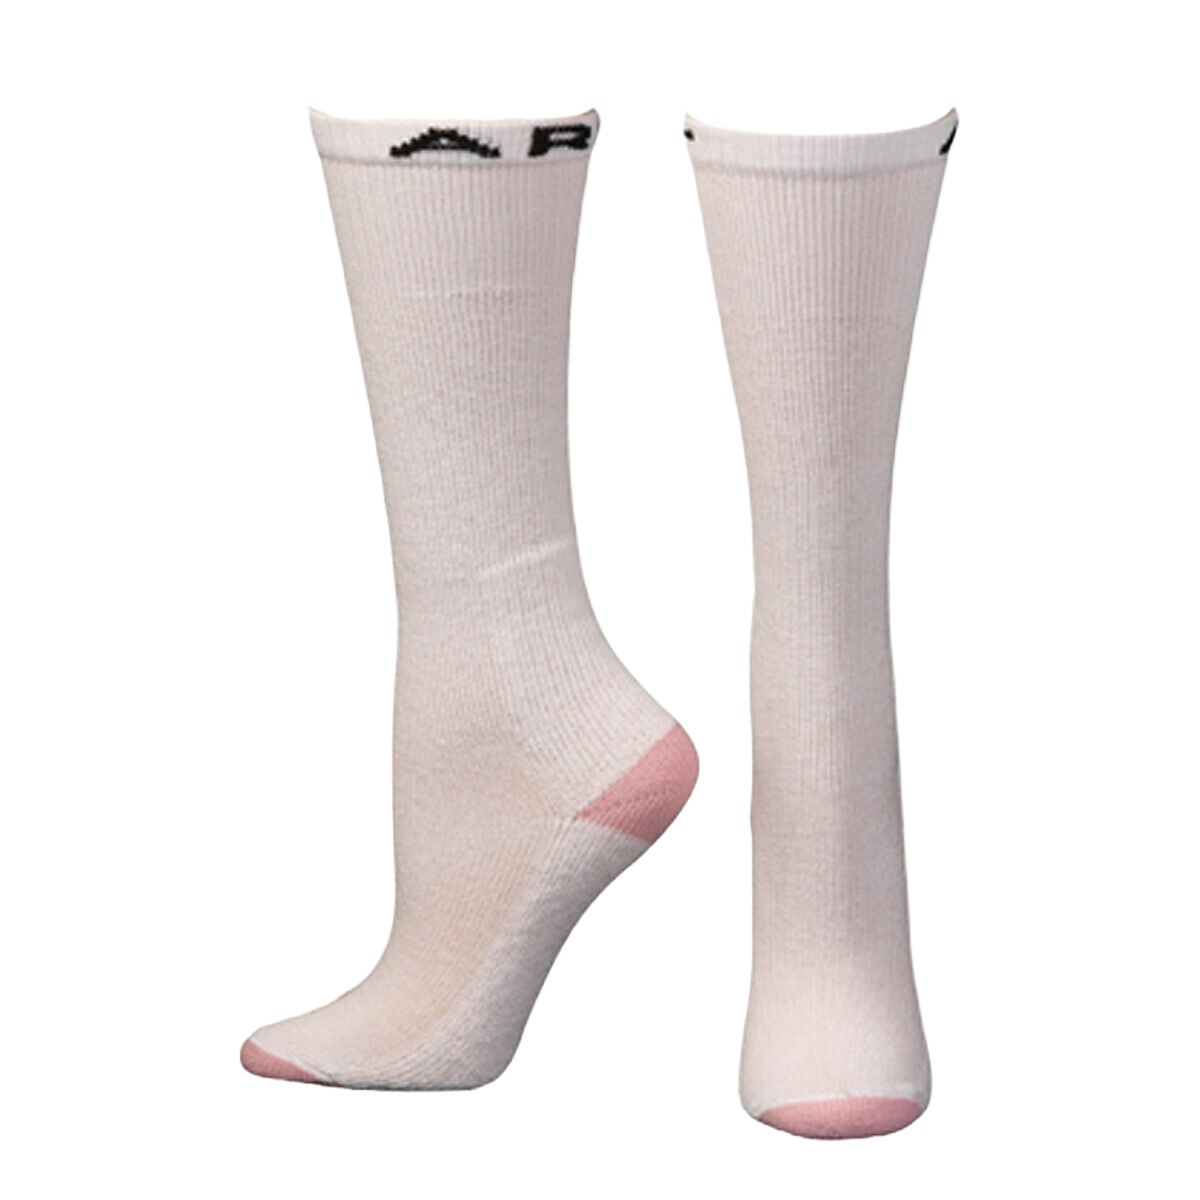 Ariat Ladies 3 Pack White & Pink Over The Calf Socks A2500405